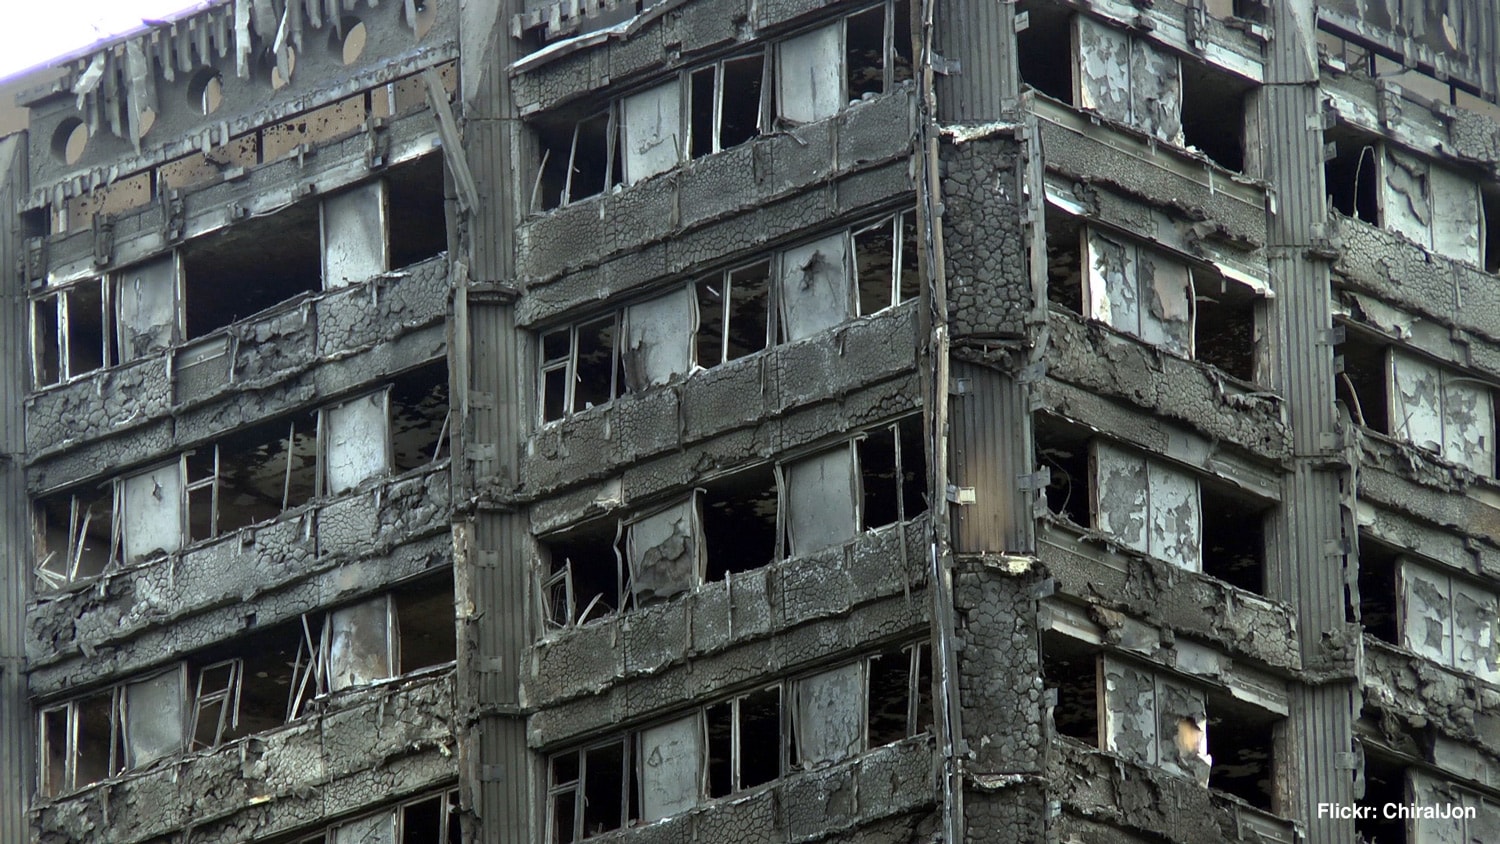 Close up of the gutted Grenfell tower